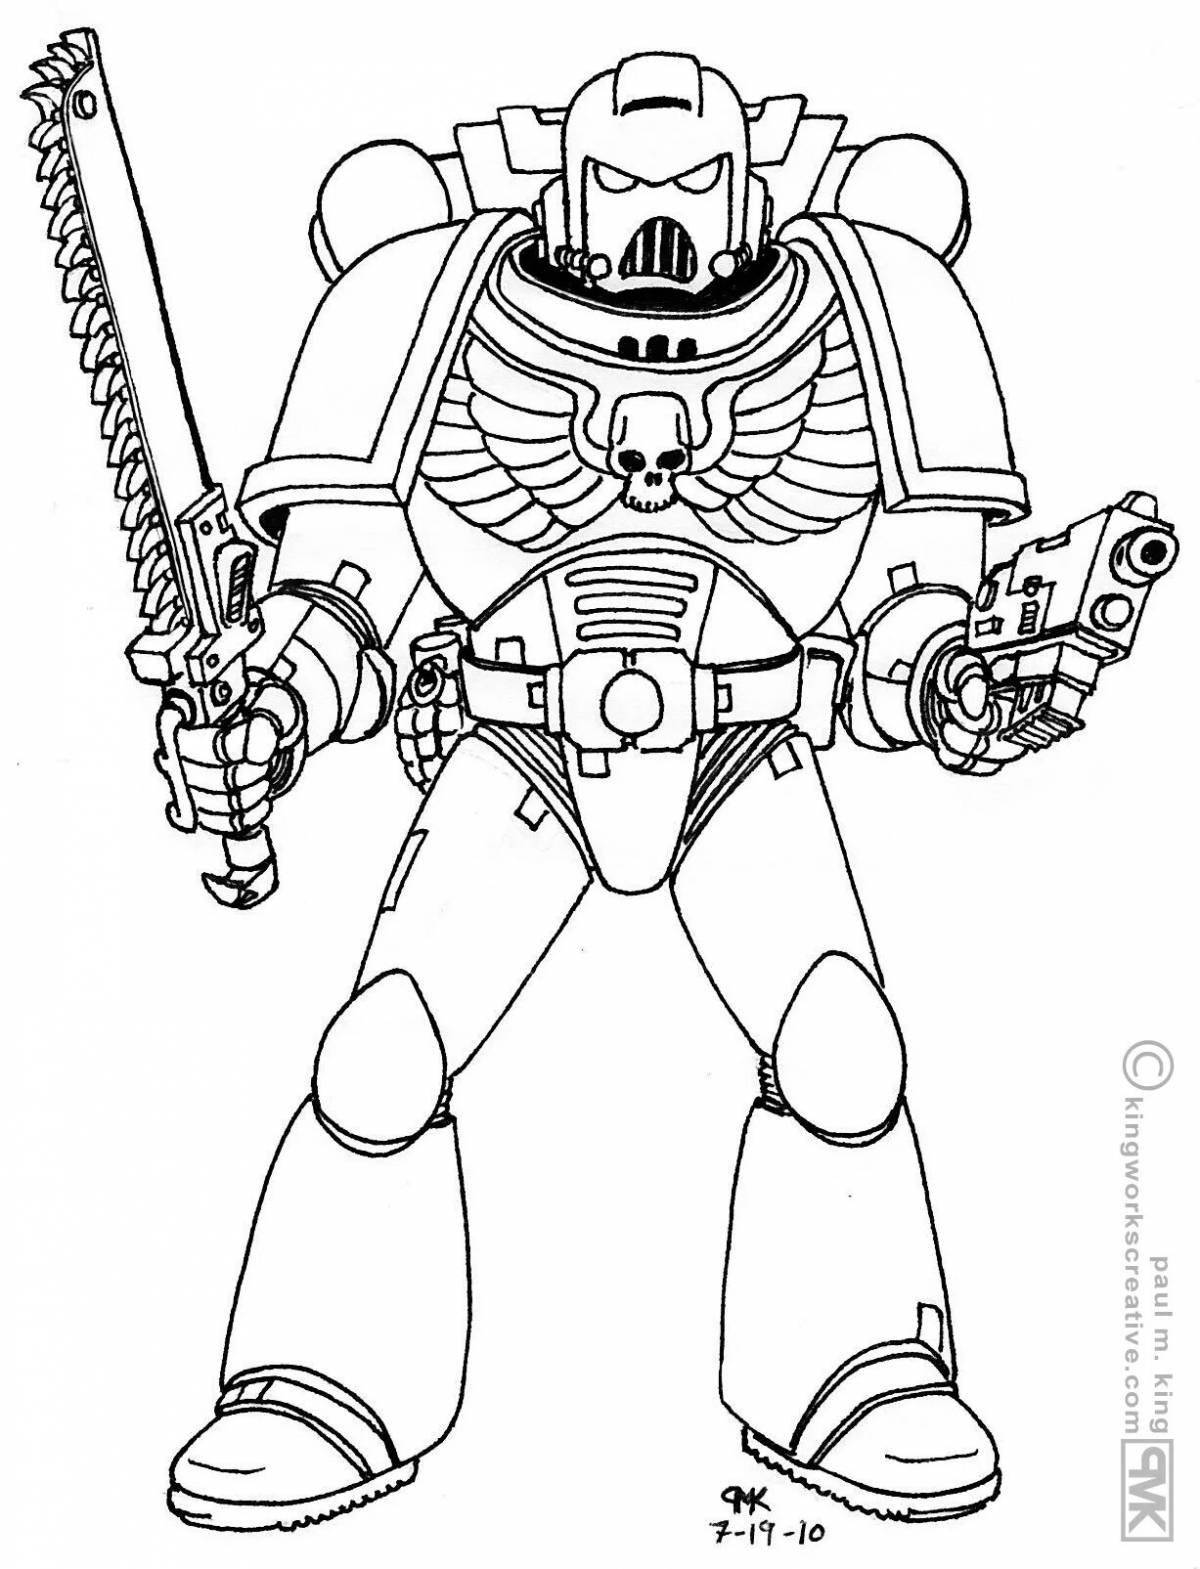 Powerful robocop coloring page